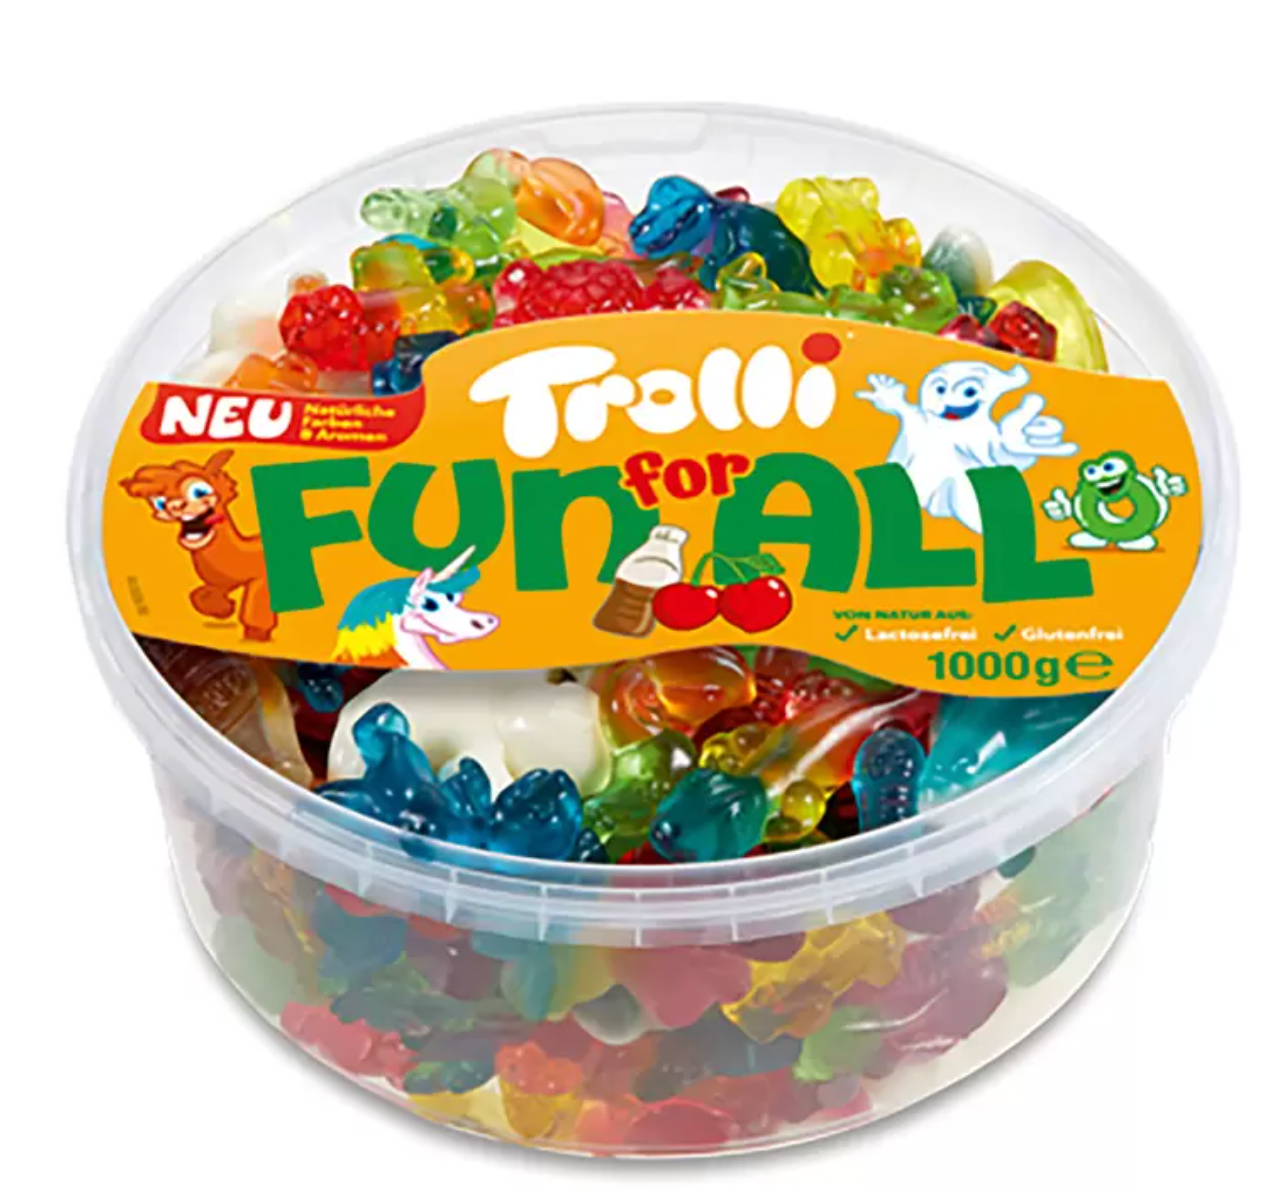 Trolli Fun for All Sweet Mix, 1kg: A Colourful Array of Delightful Candies